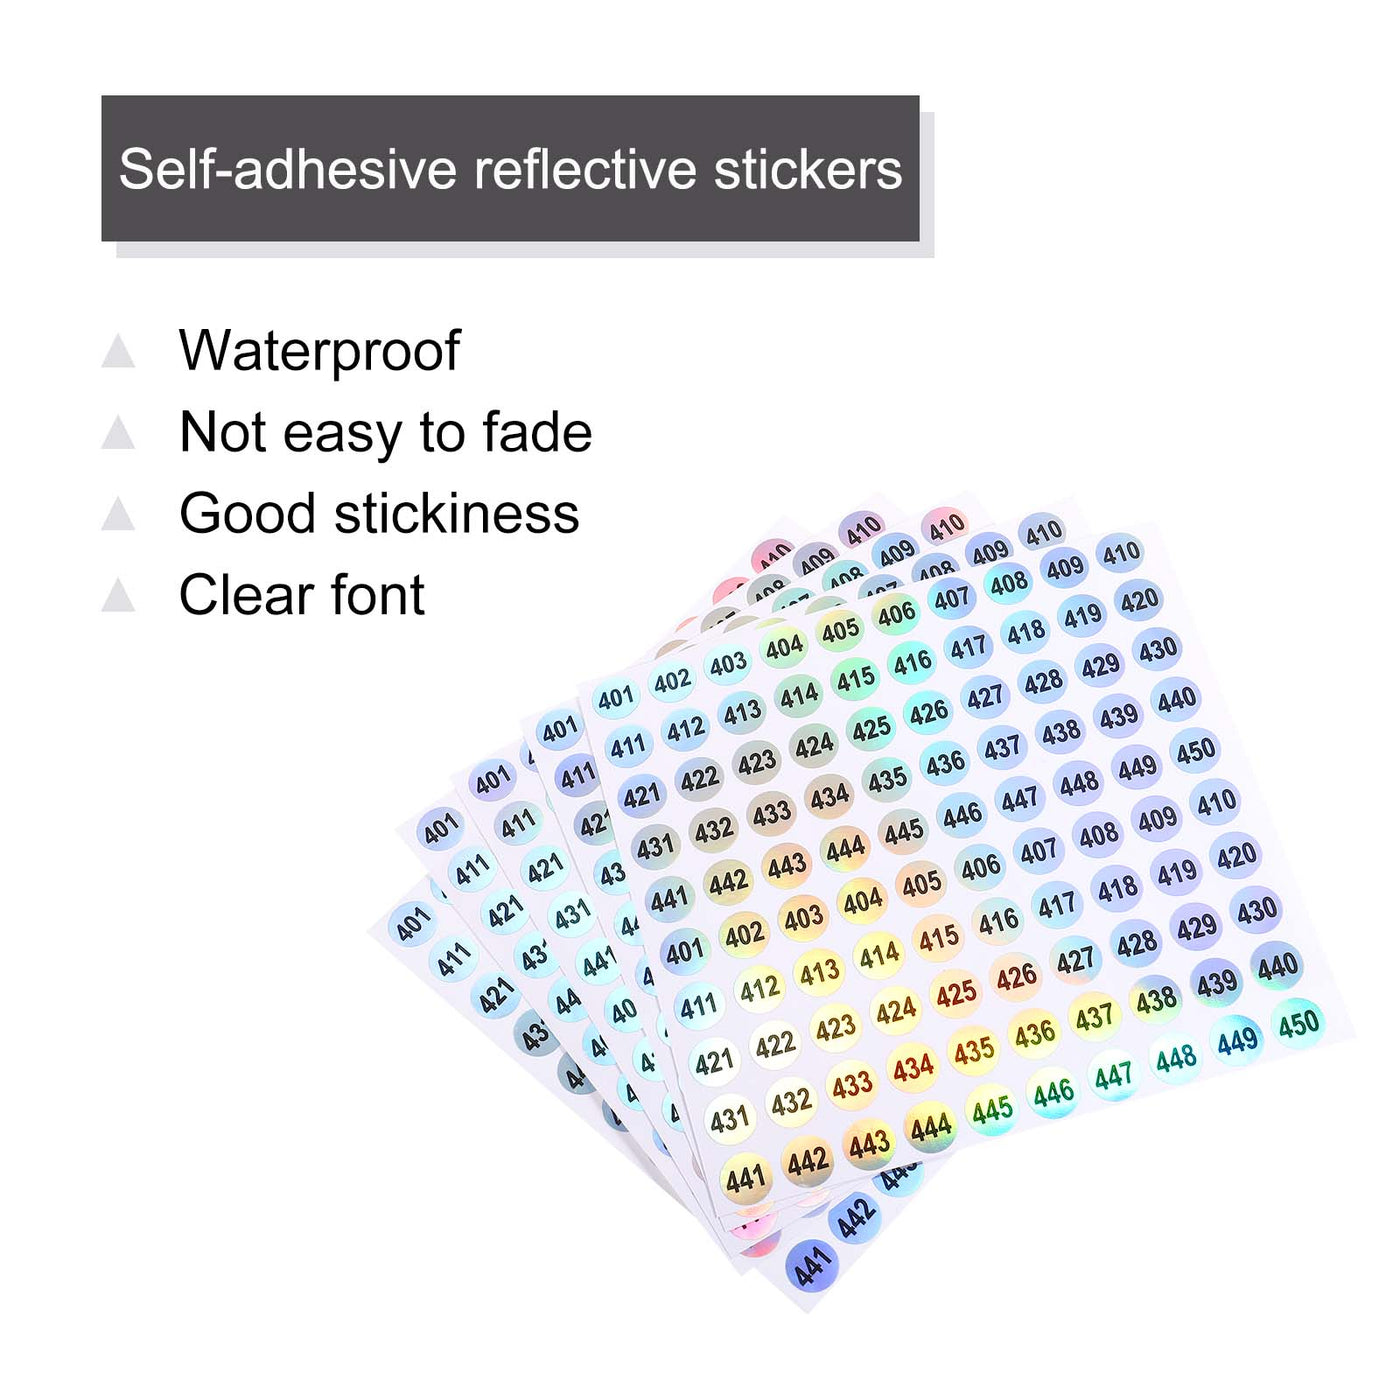 Harfington Laser Number Stickers, Number 401 to 450 Round Self Adhesive Reflective Sticker for Inventory, Storage Organizing, 10 Sheets(1000pcs)